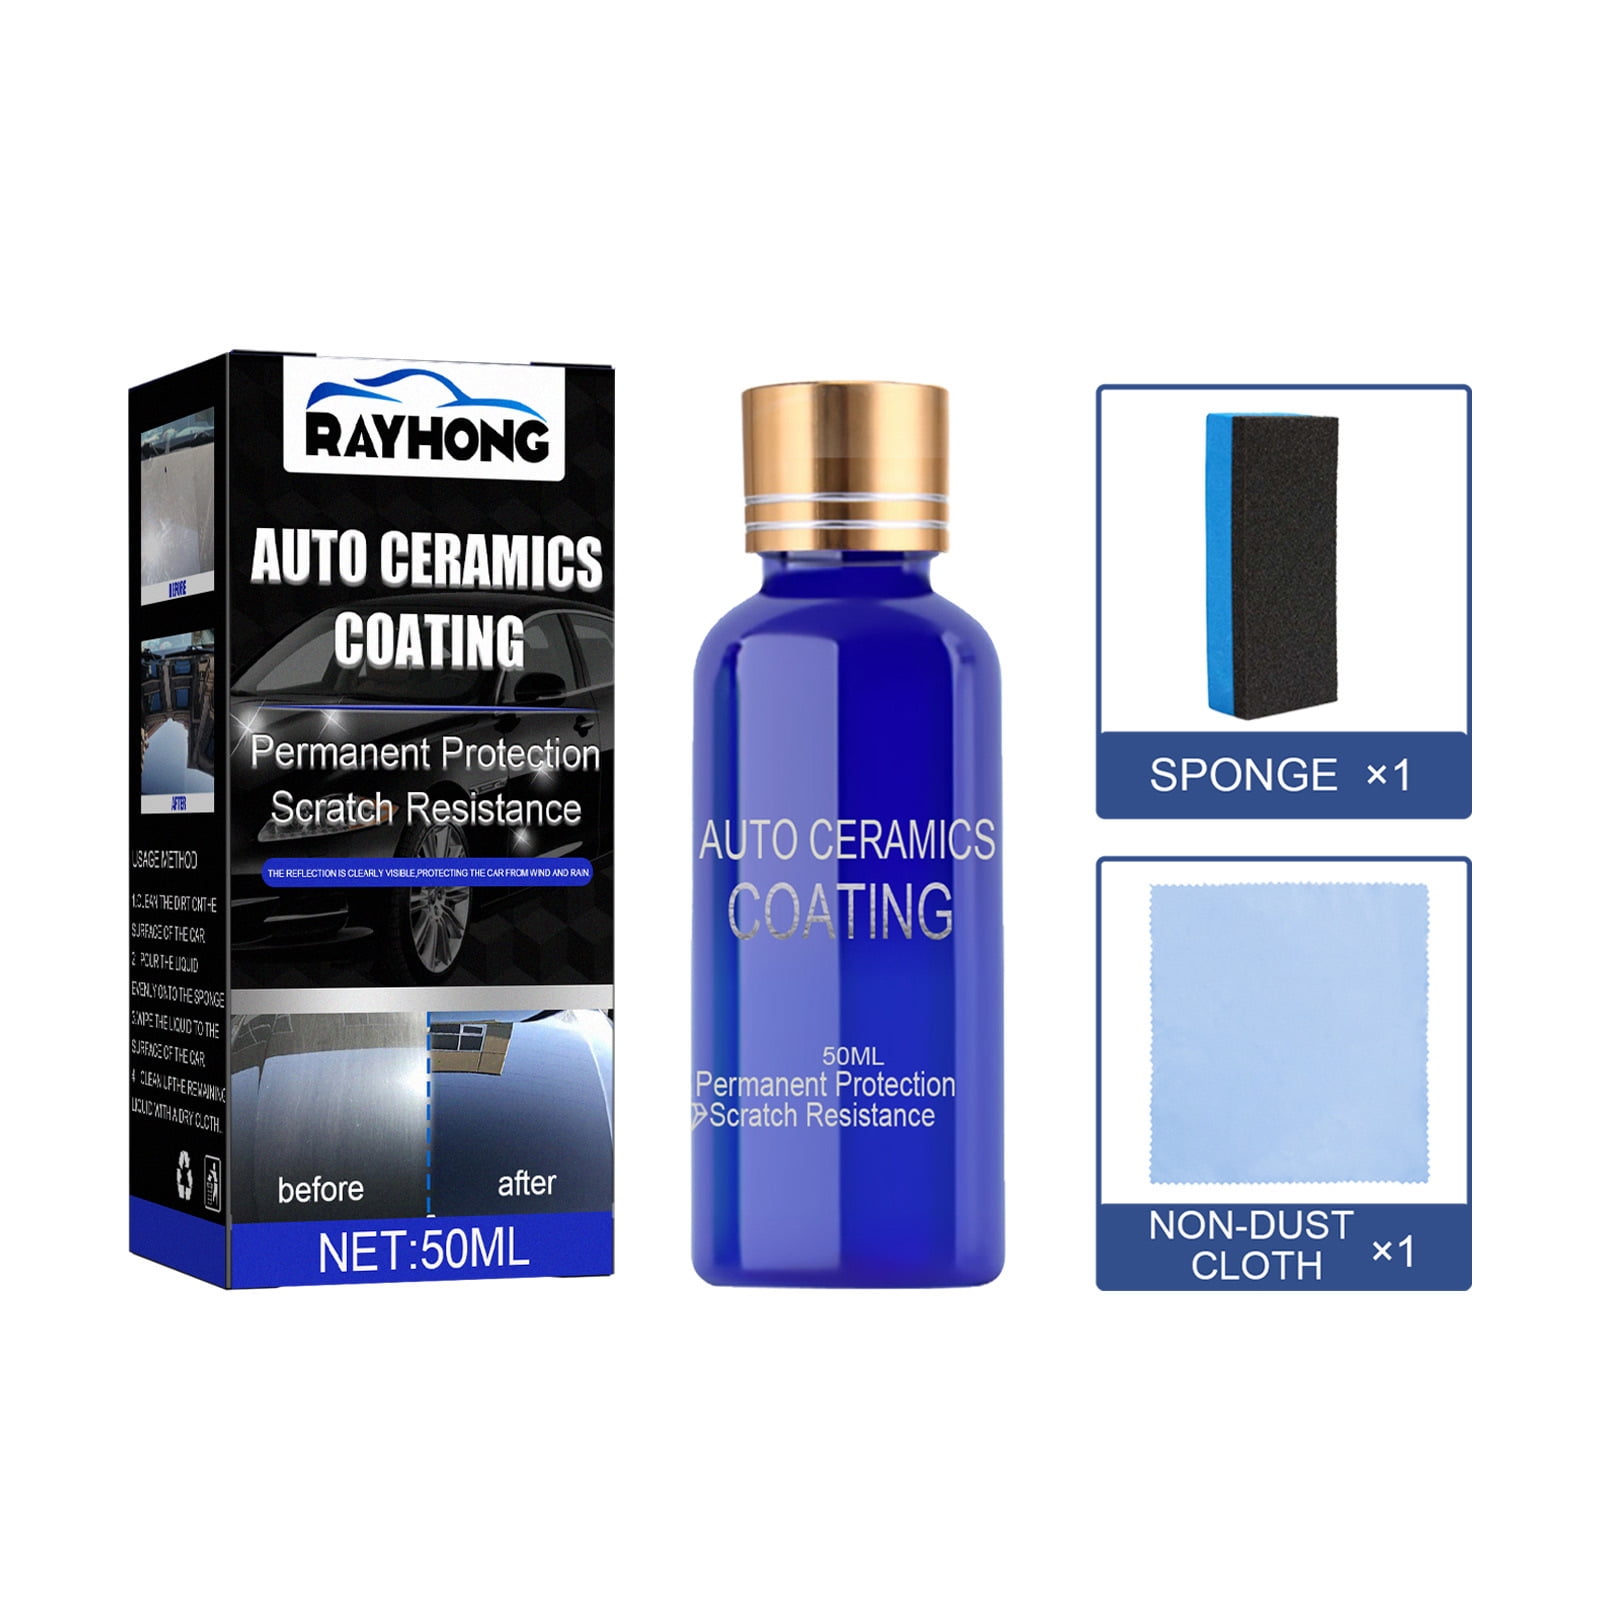 CERAMIC CAR COATING SPRAY 9H SCRATCH RESISTANT 3 YEAR PROTECTION